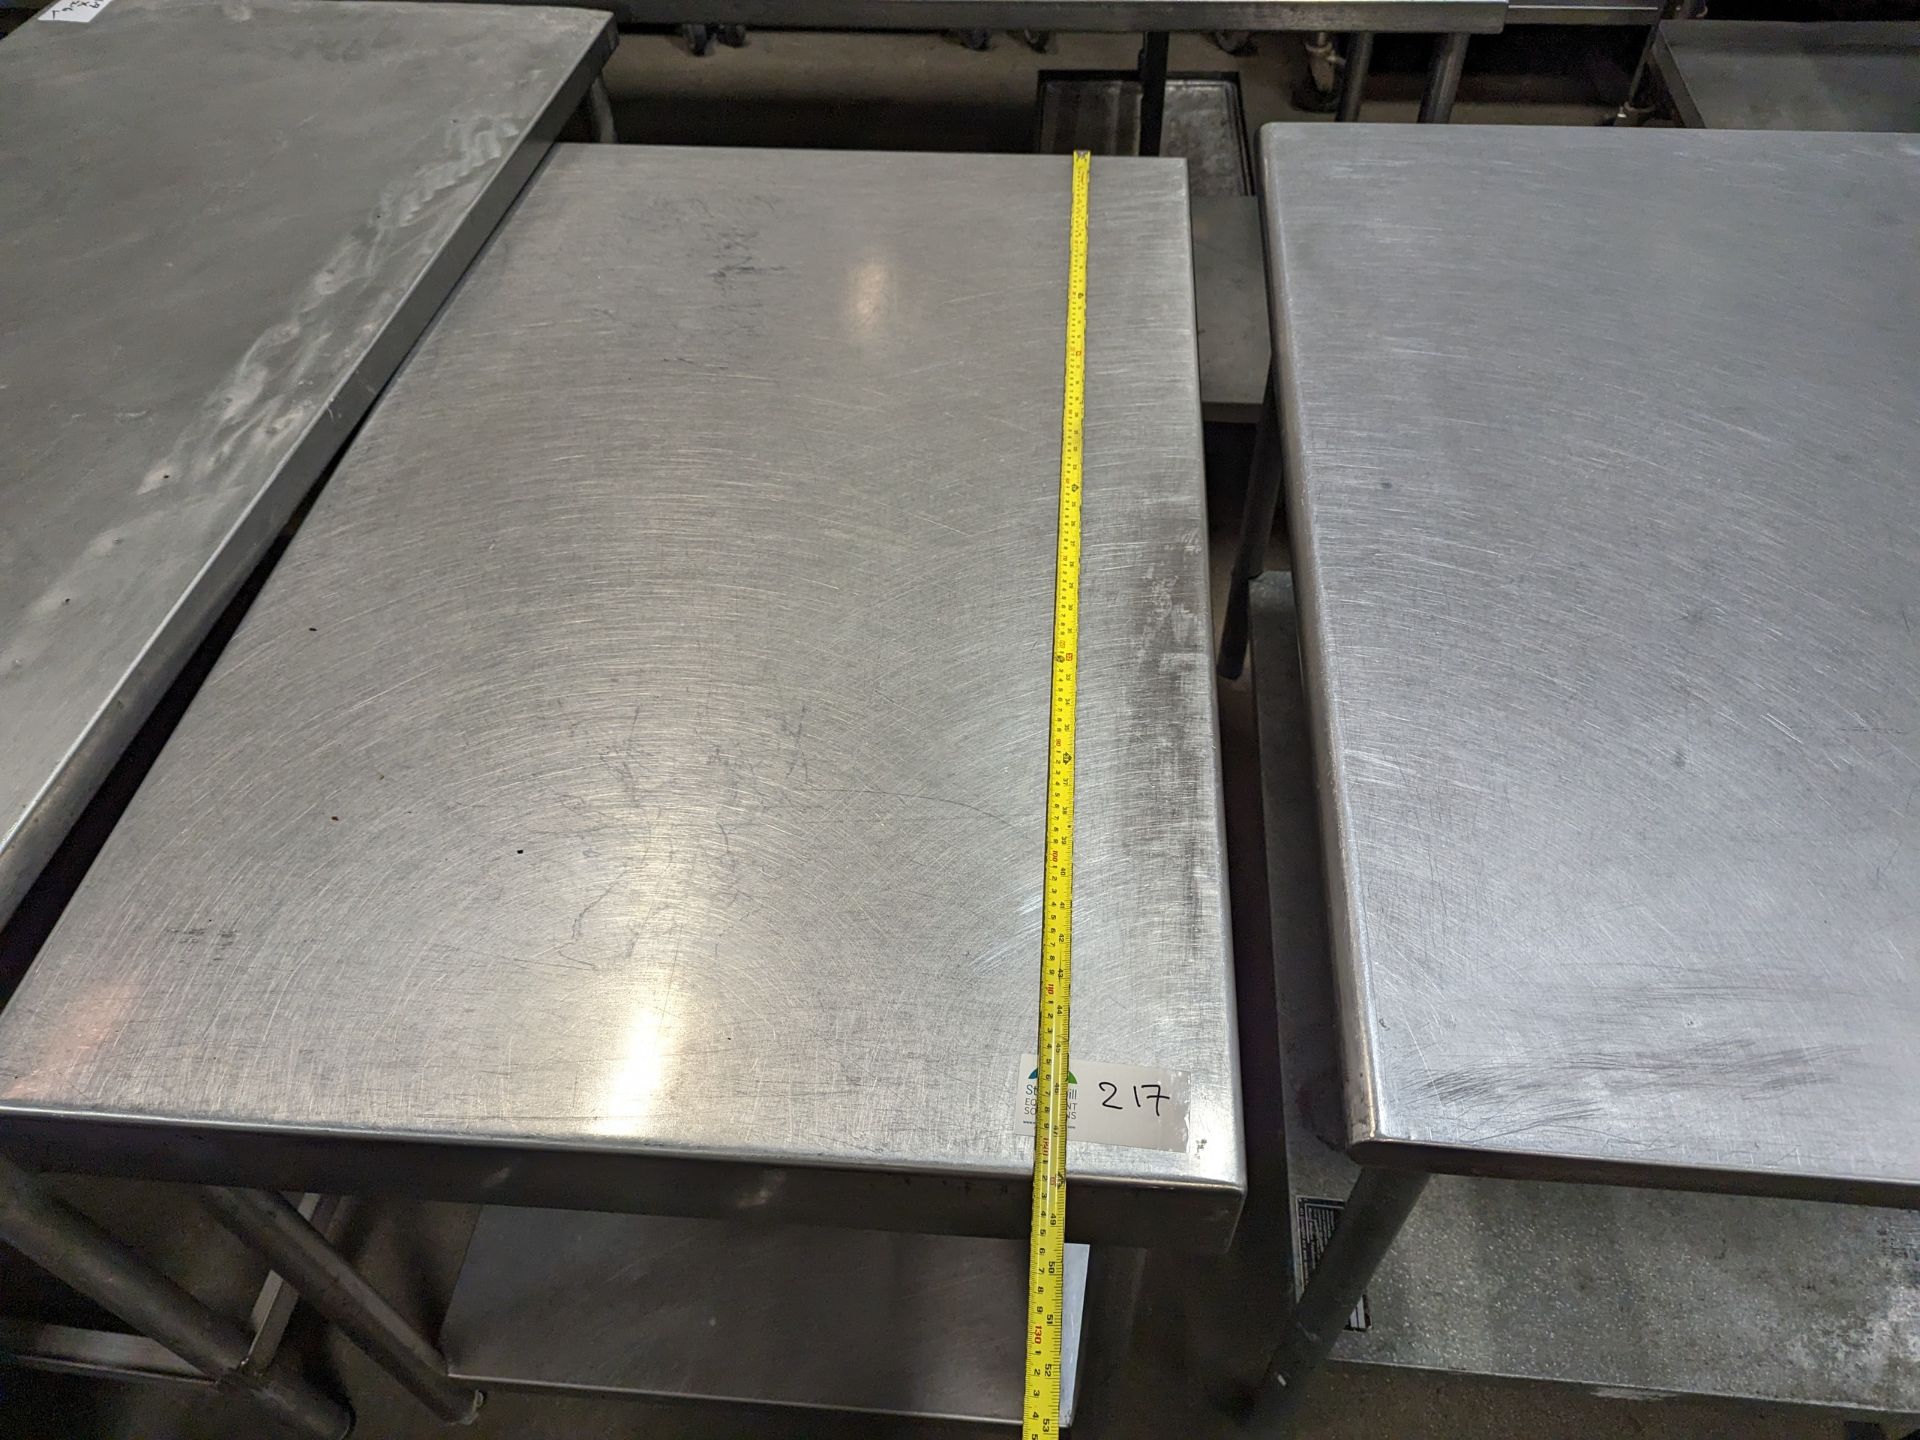 Lot of 2 4ft Long SS Tables, Dimensions LxWxH: 48x30x34 each - Image 4 of 7